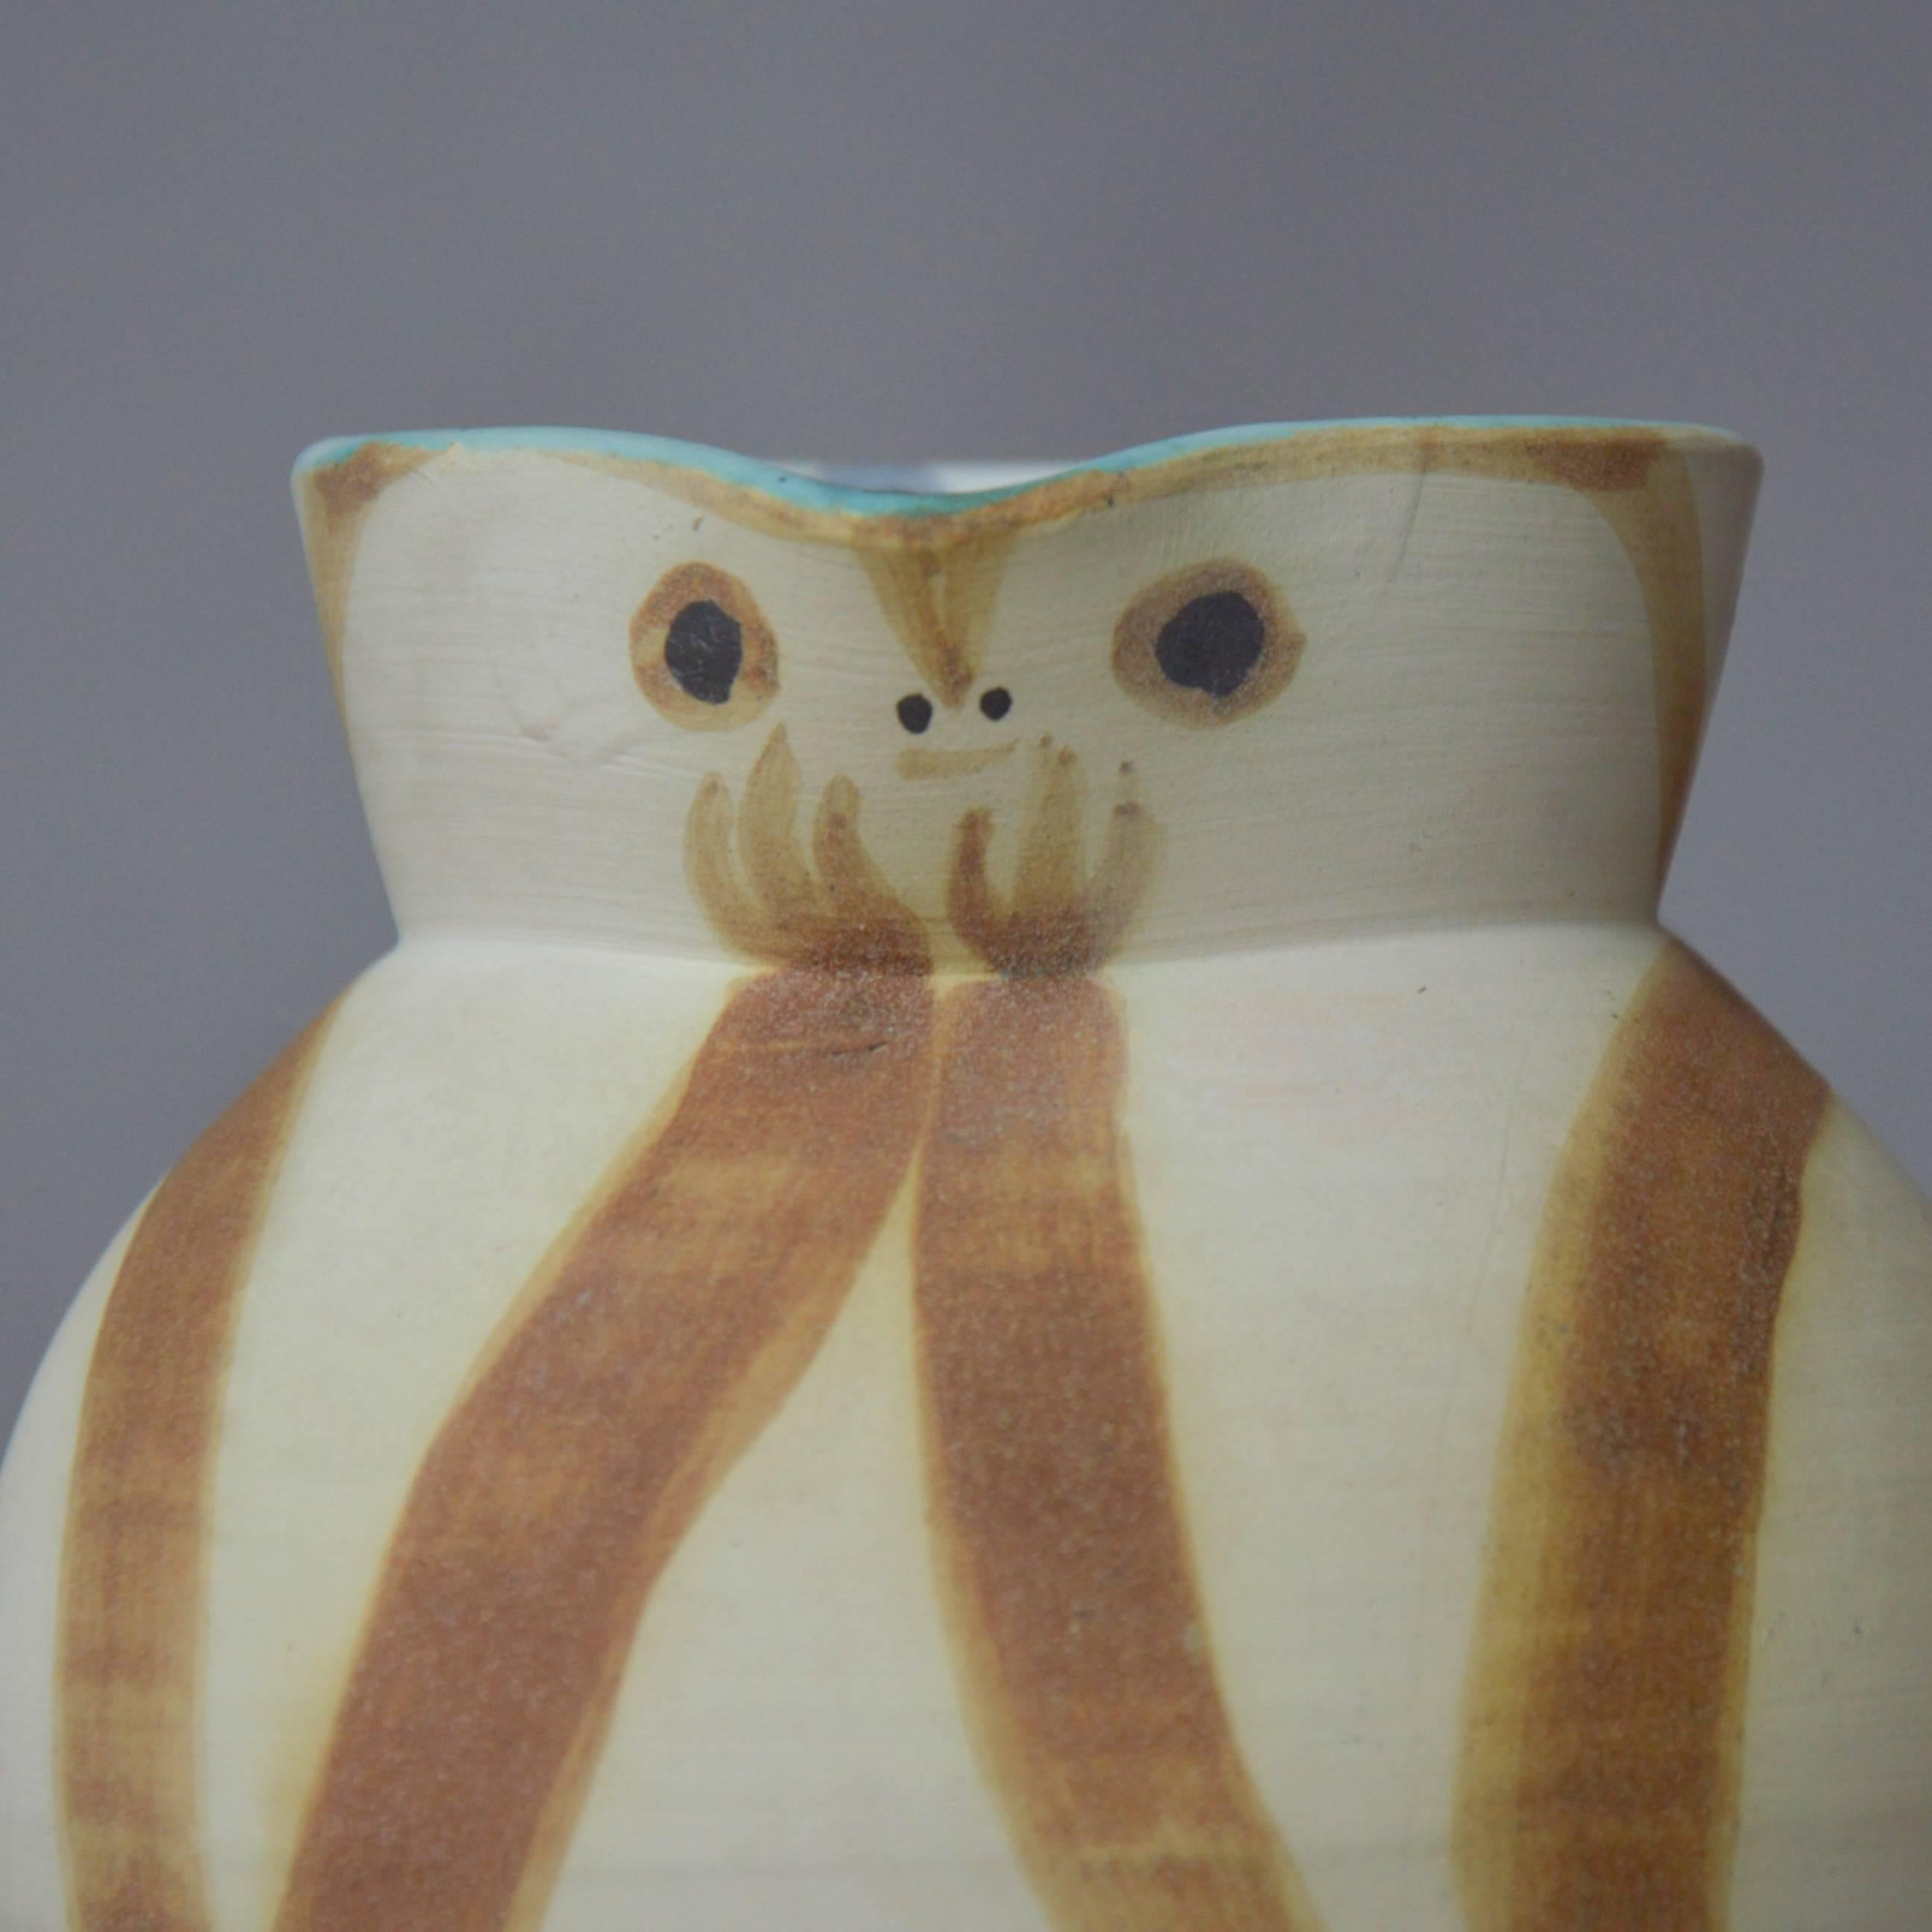 Pablo Picasso Madoura Ceramic Pitcher Little Wood-Owl, 1949 For Sale 1